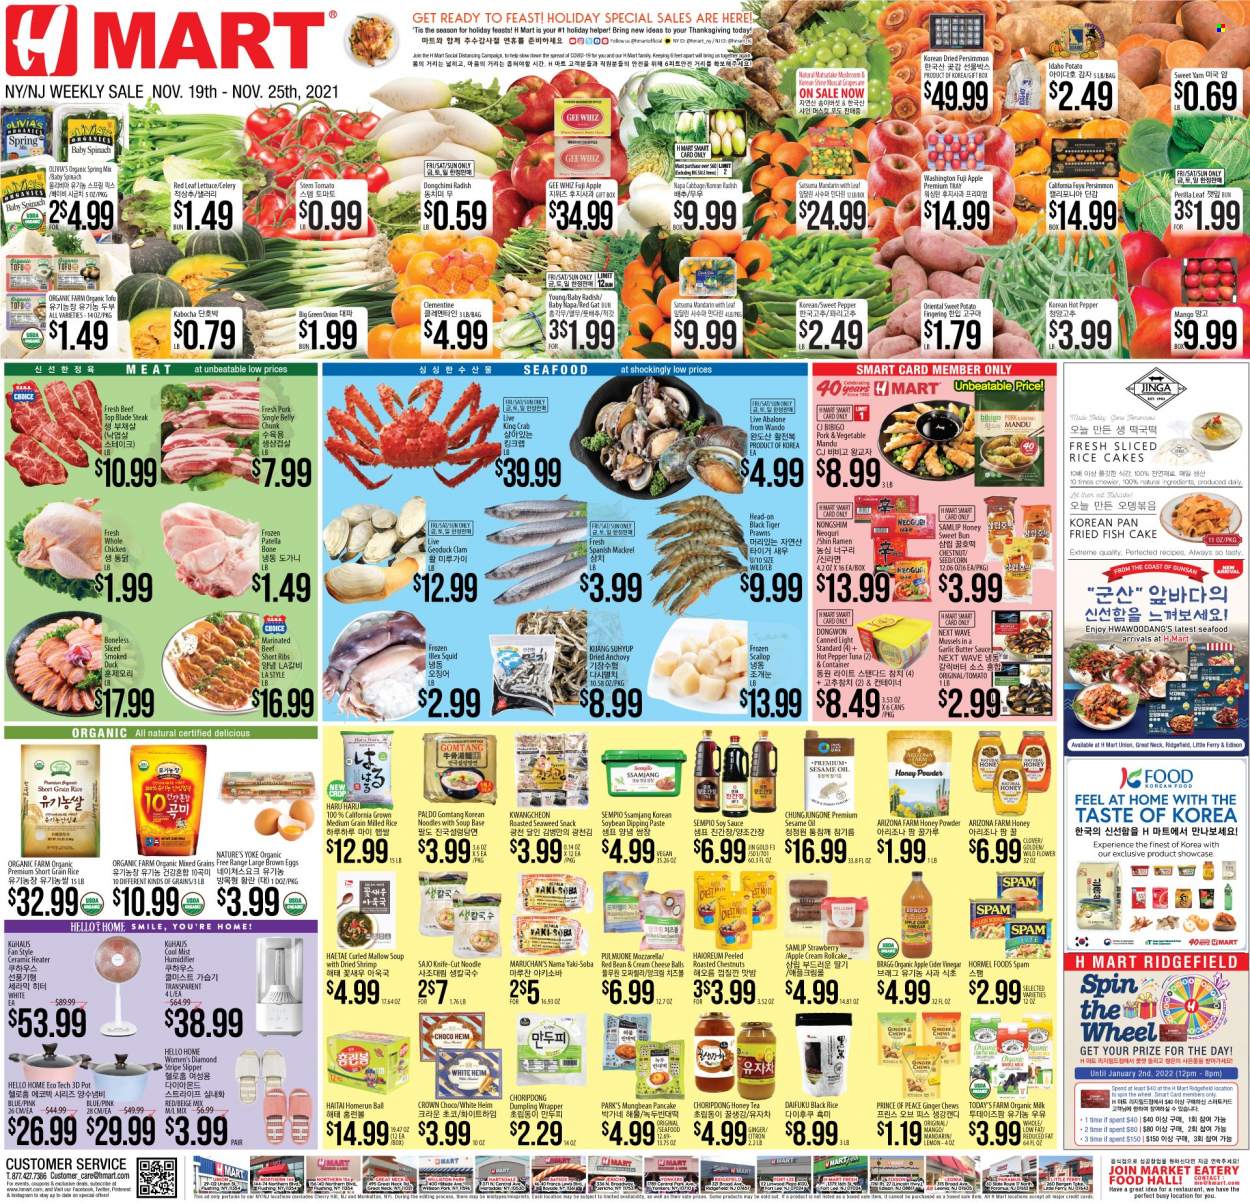 thumbnail - Hmart Flyer - 11/19/2021 - 11/25/2021 - Sales products - persimmons, corn, ginger, sweet potato, grapes, mandarines, Fuji apple, chayote, clams, mussels, scallops, squid, tuna, king crab, seafood, prawns, crab, fish, shrimps, abalone, fried fish, ramen, smoked duck, soup, dumplings, noodles, Hormel, Spam, cream cheese, mozzarella, cheese, tofu, Clover, organic milk, eggs, butter, fish cake, snack, chewing gum, seaweed, anchovies, rice, short grain rice, soy sauce, apple cider vinegar, sesame oil, vinegar, oil, honey, chestnuts, AriZona, tea, whole chicken, beef meat, beef ribs, steak, top blade, marinated beef, WAVE, knife, wrapper, pot, pan, container, deco strips. Page 1.